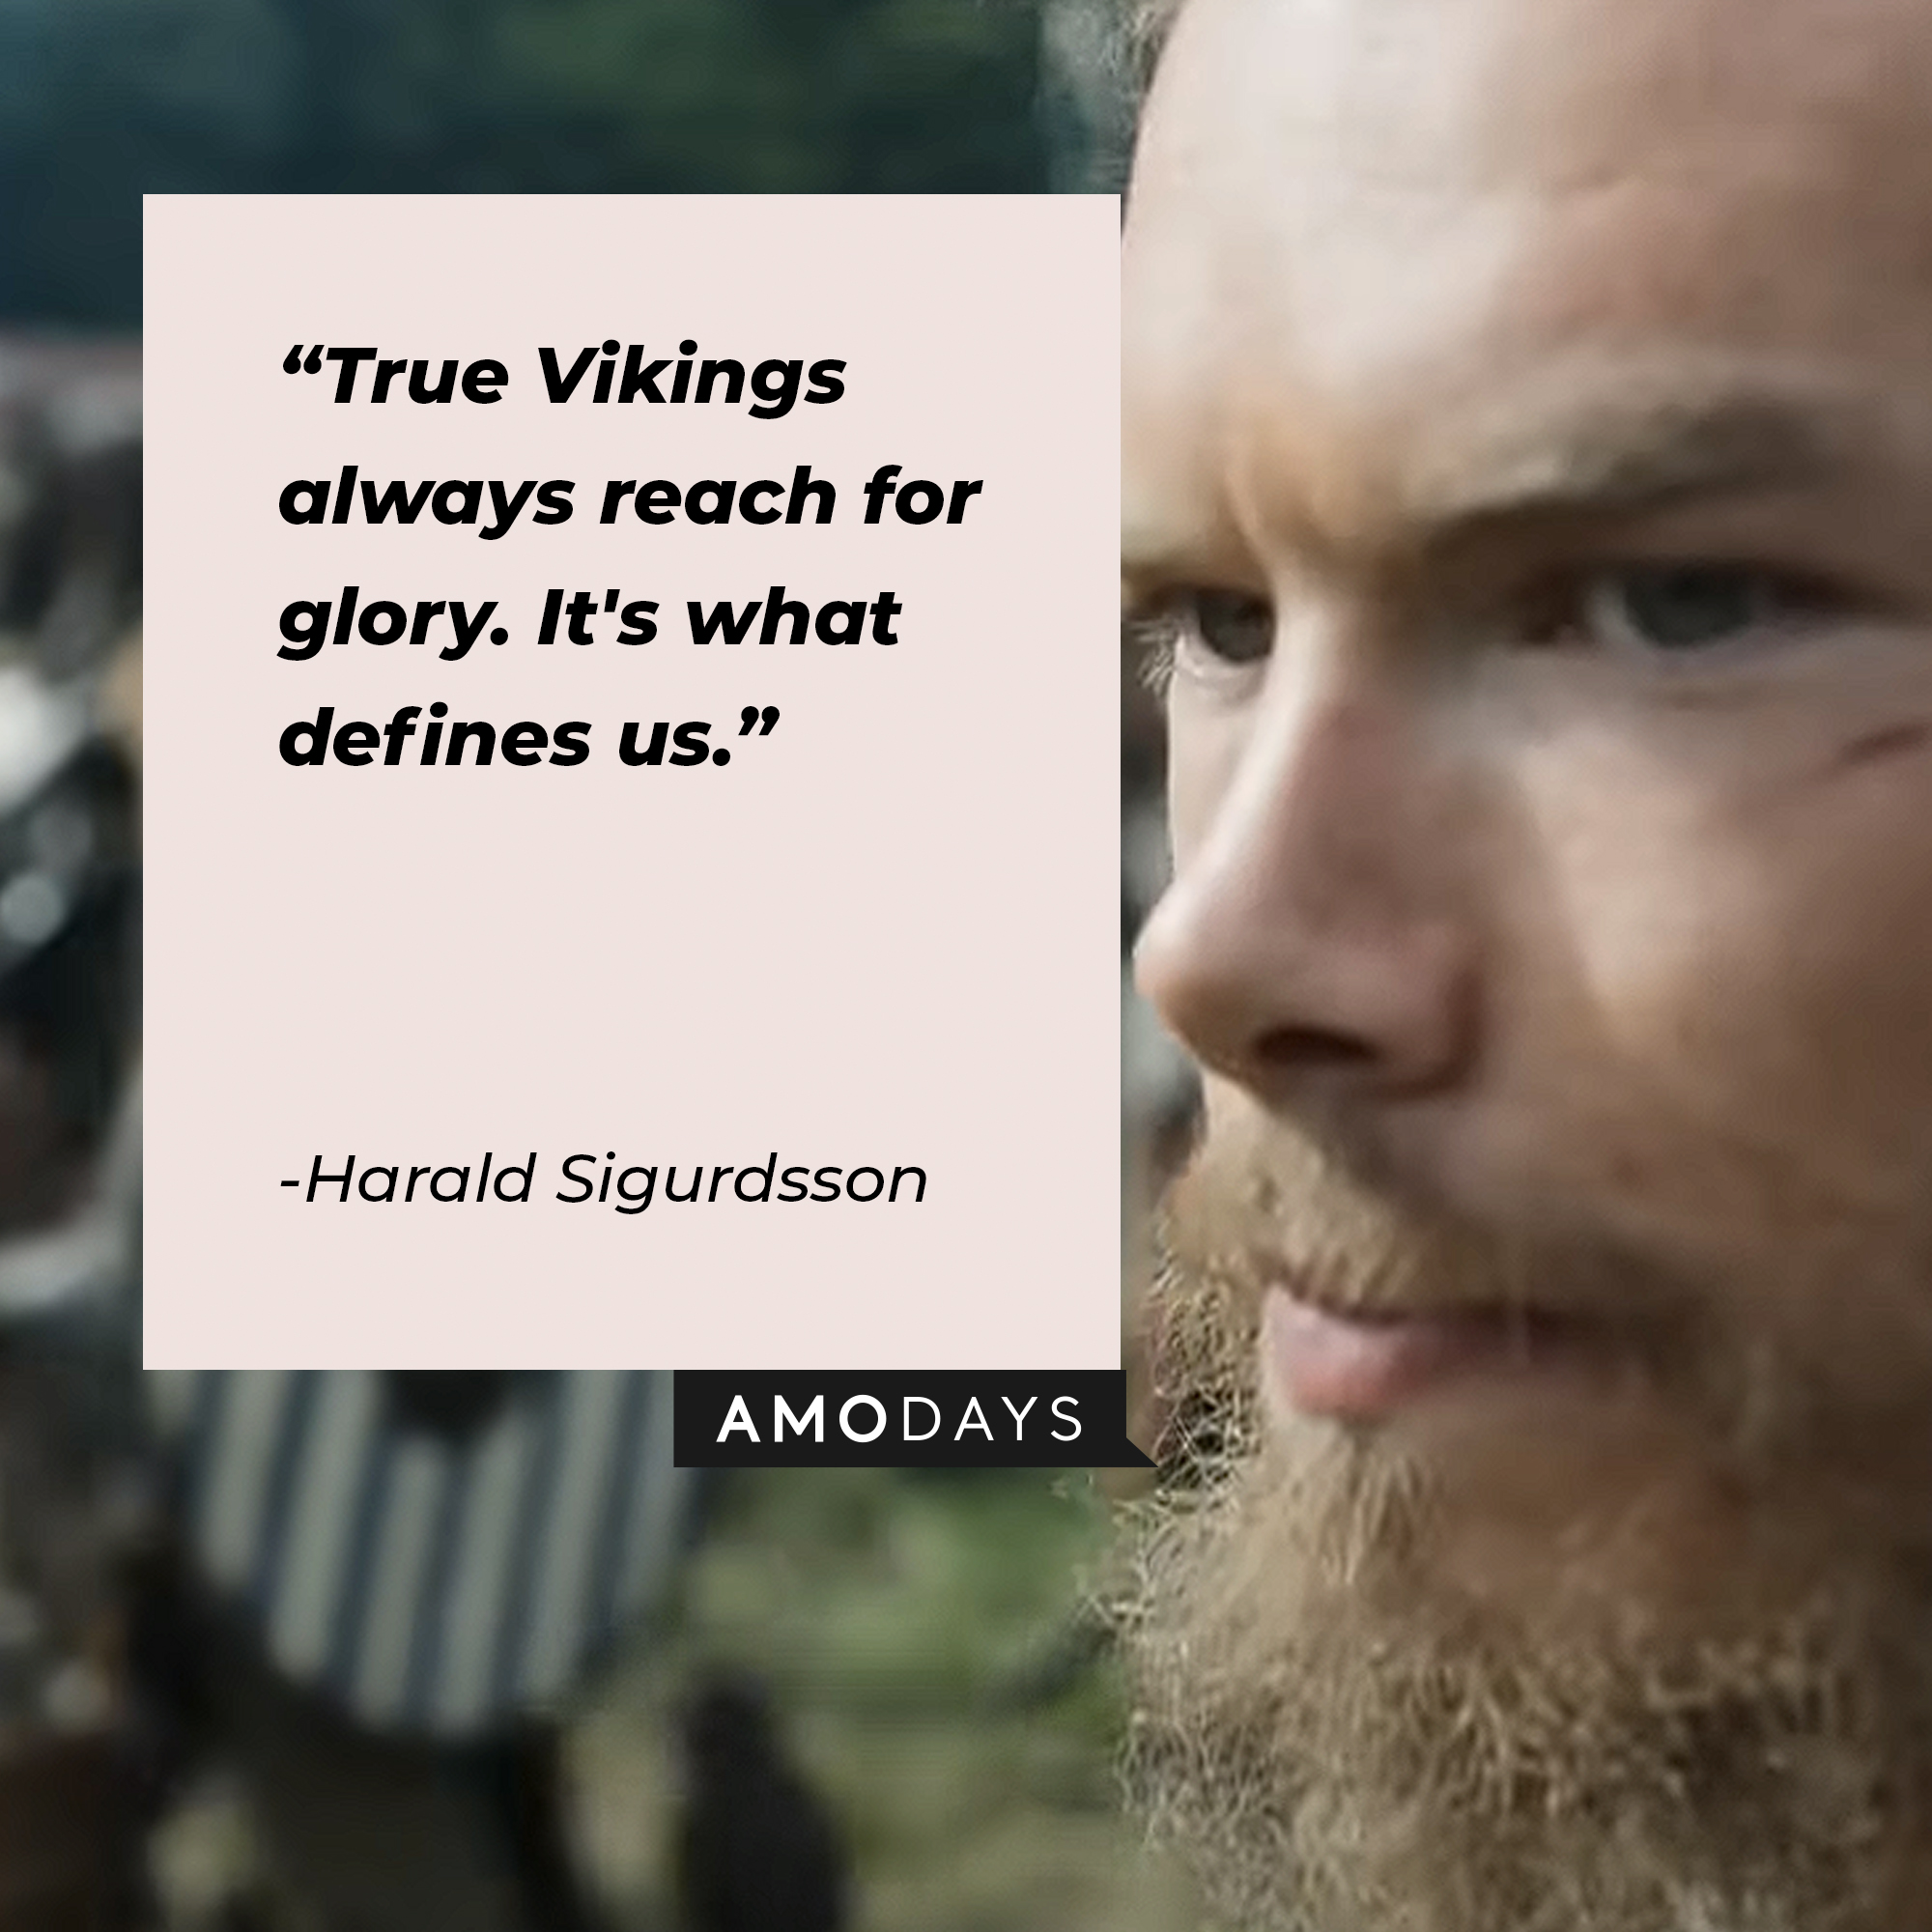 Harald Sigurdsson's quote: "True Vikings always reach for glory. It's what defines us." | Image: youtube.com/Netflix